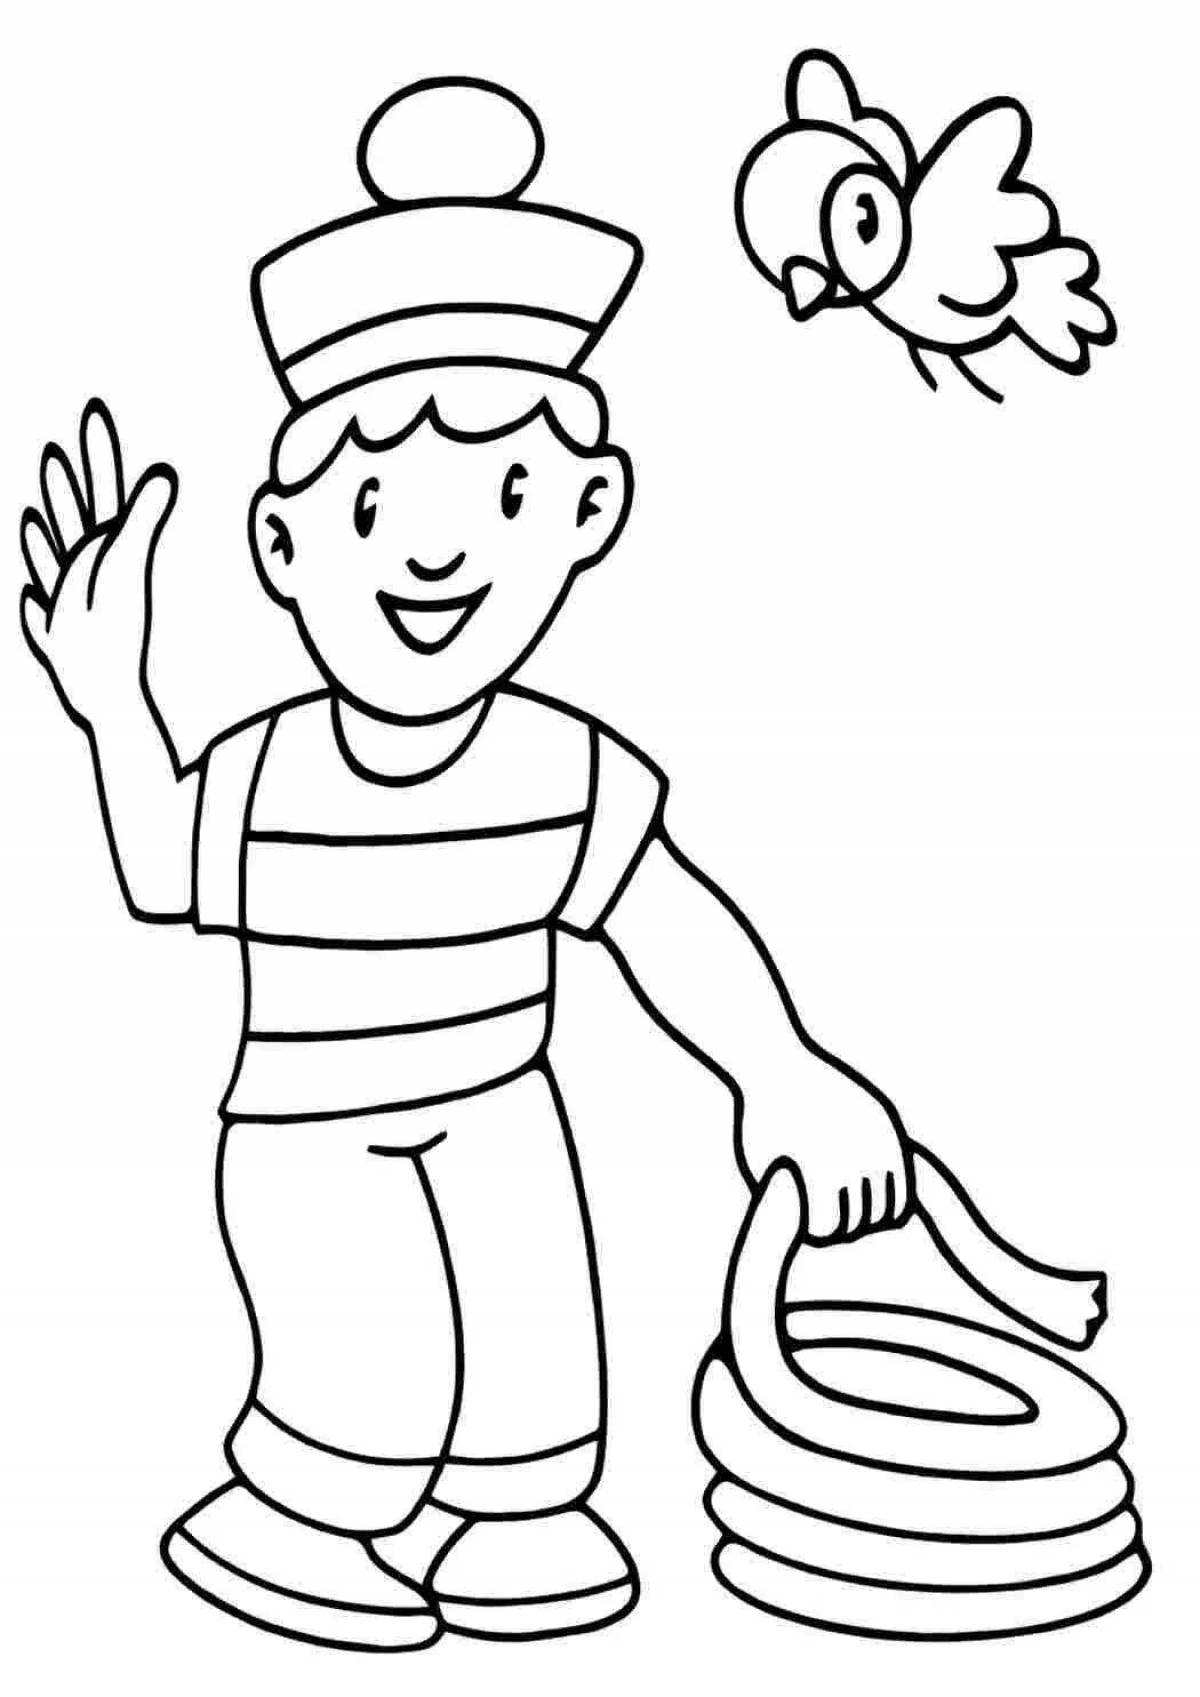 Amazing house coloring page for kids